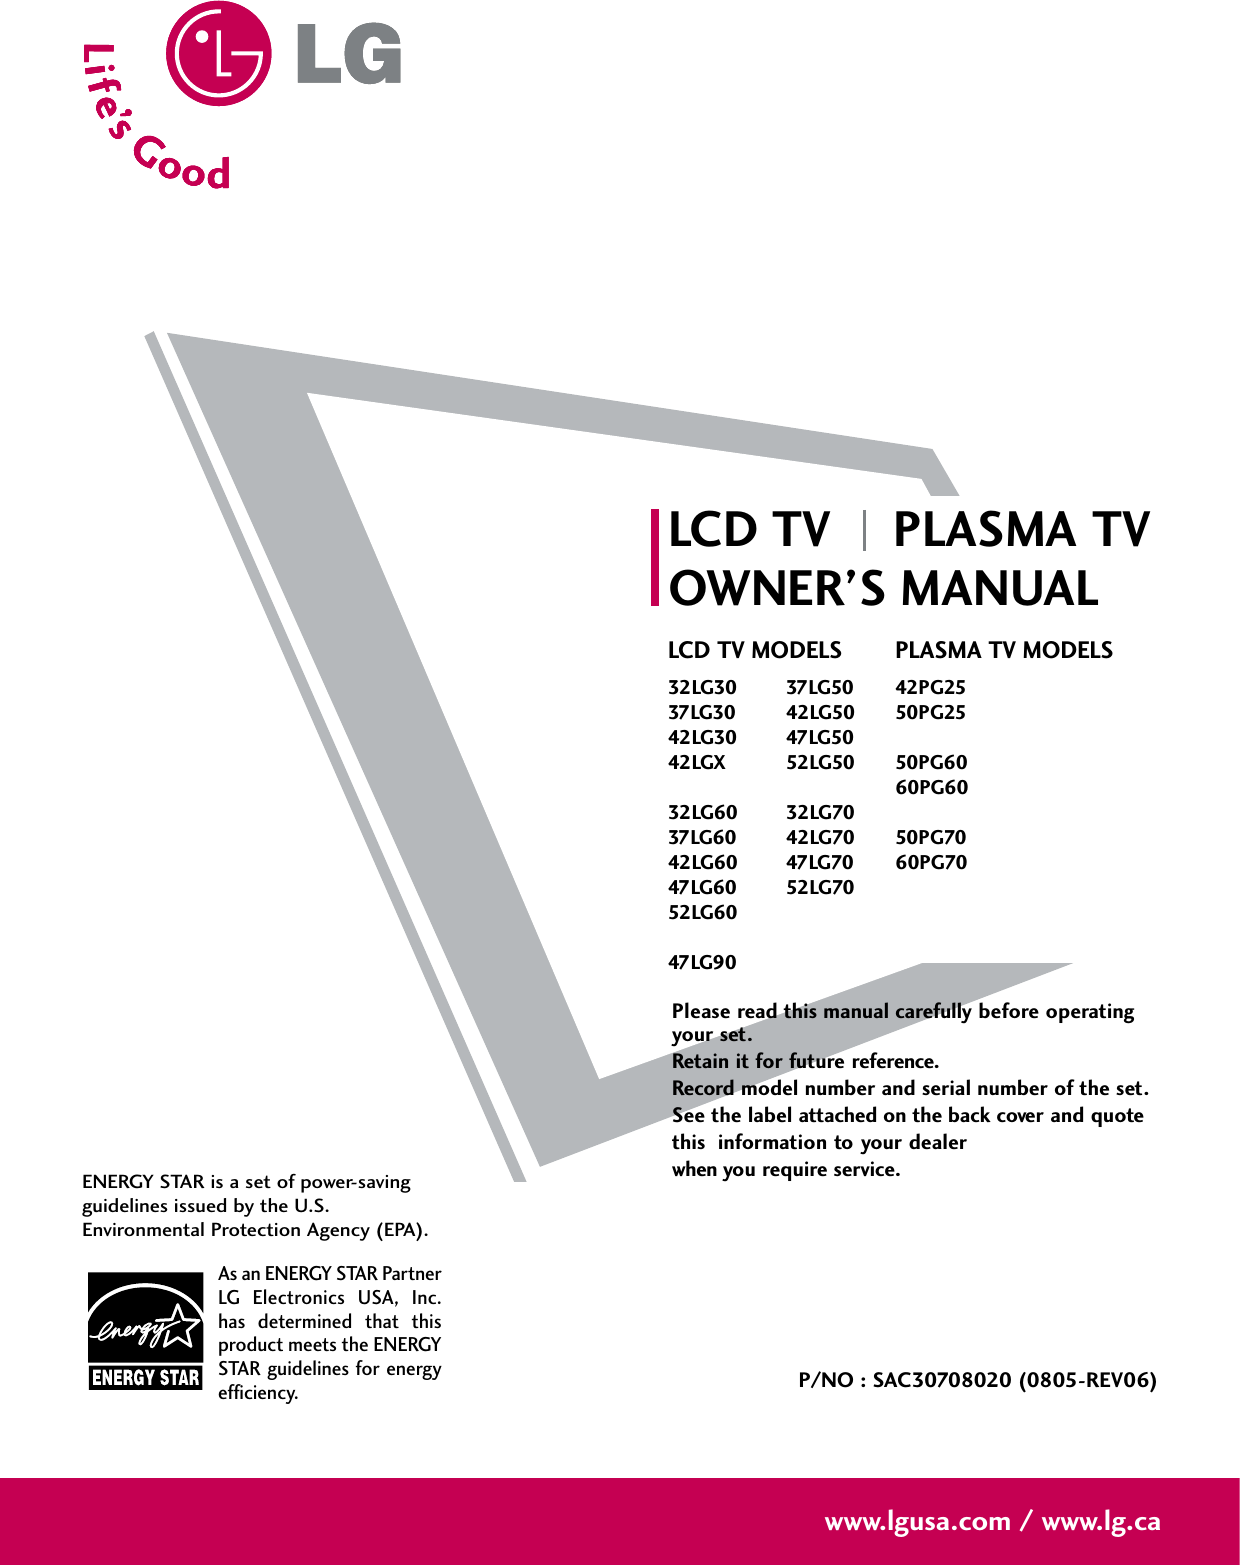 Please read this manual carefully before operatingyour set. Retain it for future reference.Record model number and serial number of the set. See the label attached on the back cover and quote this  information to your dealer when you require service.LCD TV PLASMA TVOWNER’S MANUALLCD TV MODELS32LG30 37LG5037LG30 42LG5042LG30 47LG5042LGX 52LG5032LG60 32LG7037LG60 42LG7042LG60 47LG7047LG60 52LG7052LG6047LG90PLASMA TV MODELS42PG2550PG2550PG6060PG6050PG7060PG70P/NO : SAC30708020 (0805-REV06)www.lgusa.com / www.lg.caAs an ENERGY STAR PartnerLG  Electronics  USA,  Inc.has  determined  that  thisproduct meets the ENERGYSTAR guidelines for energyefficiency.ENERGY STAR is a set of power-savingguidelines issued by the U.S.Environmental Protection Agency (EPA).